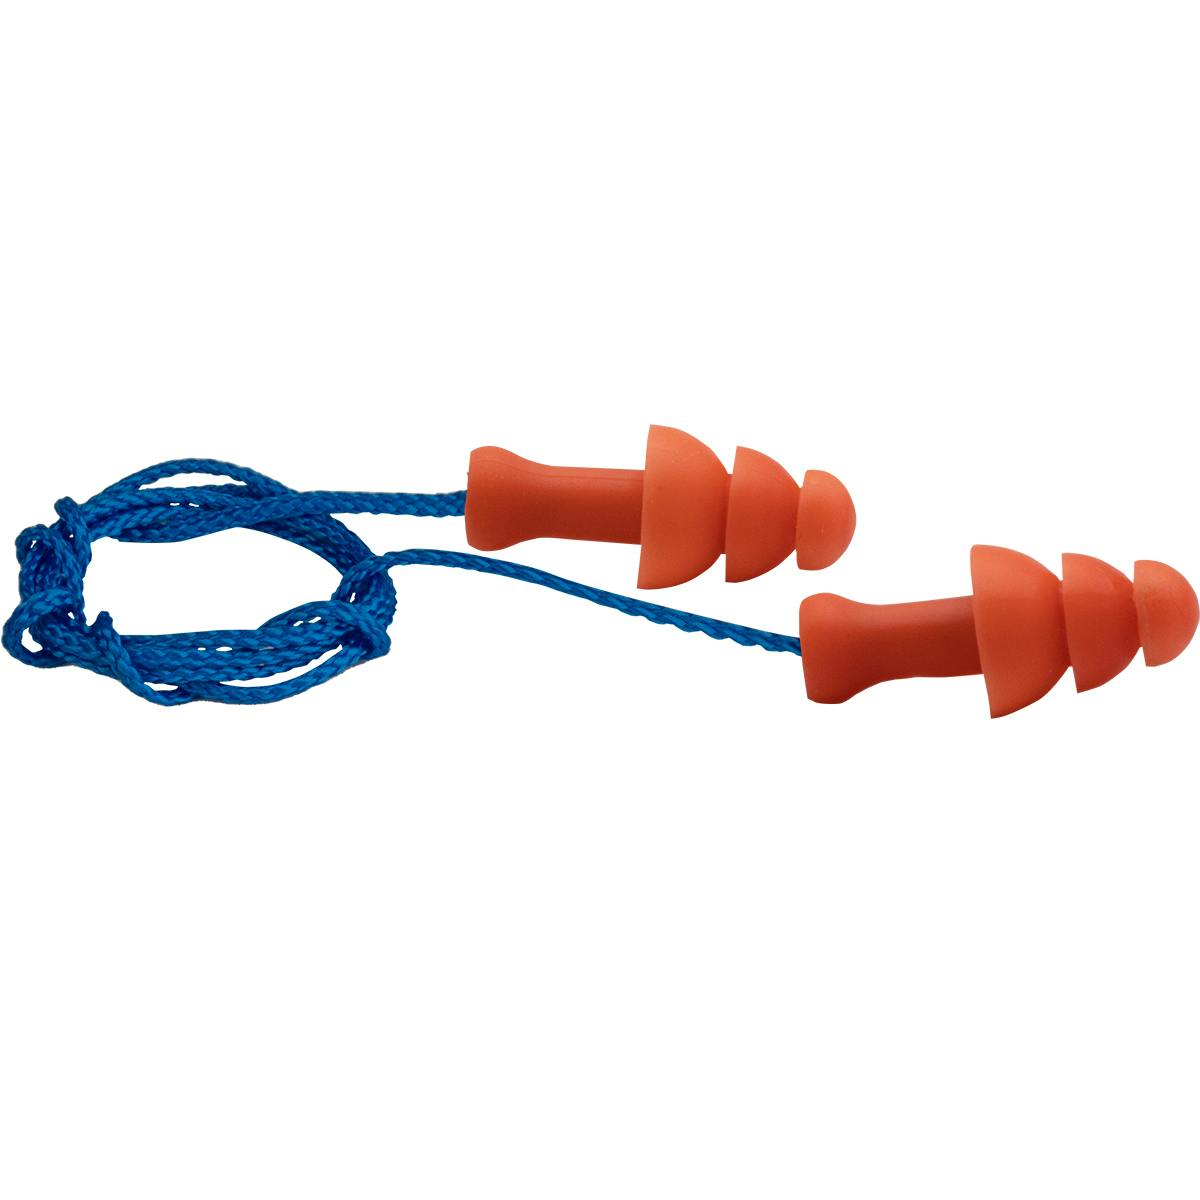 Small Reusable TPR Corded Ear Plugs - NRR 25, Orange (267-HPR330C) - S_0